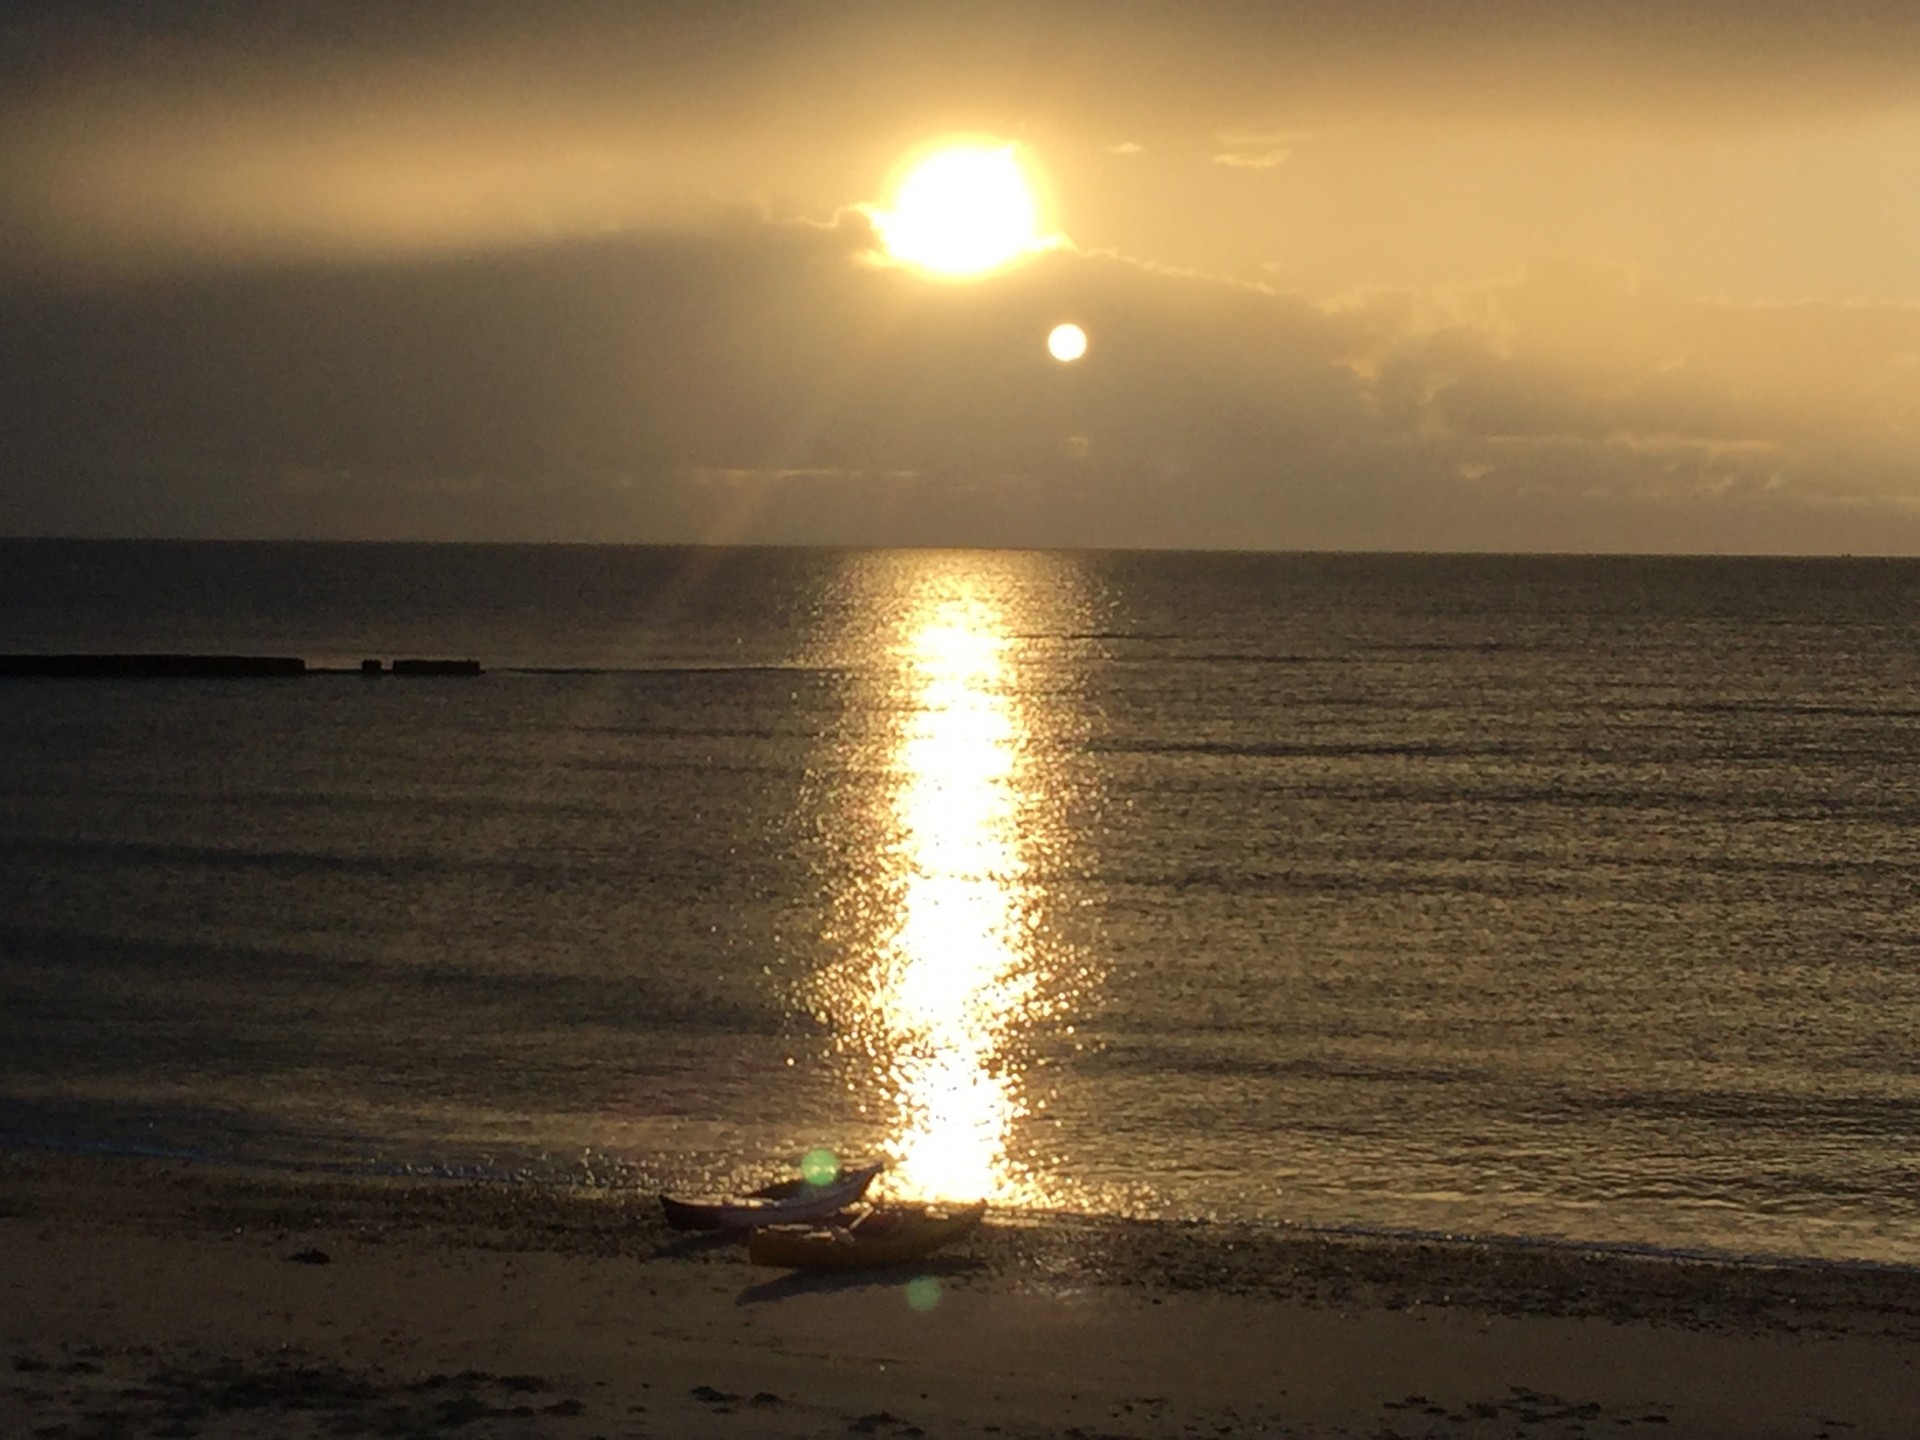 Sunset over the calm seas of East Anglia with two kayaks on the beach, Suffolk night time kayak trip.